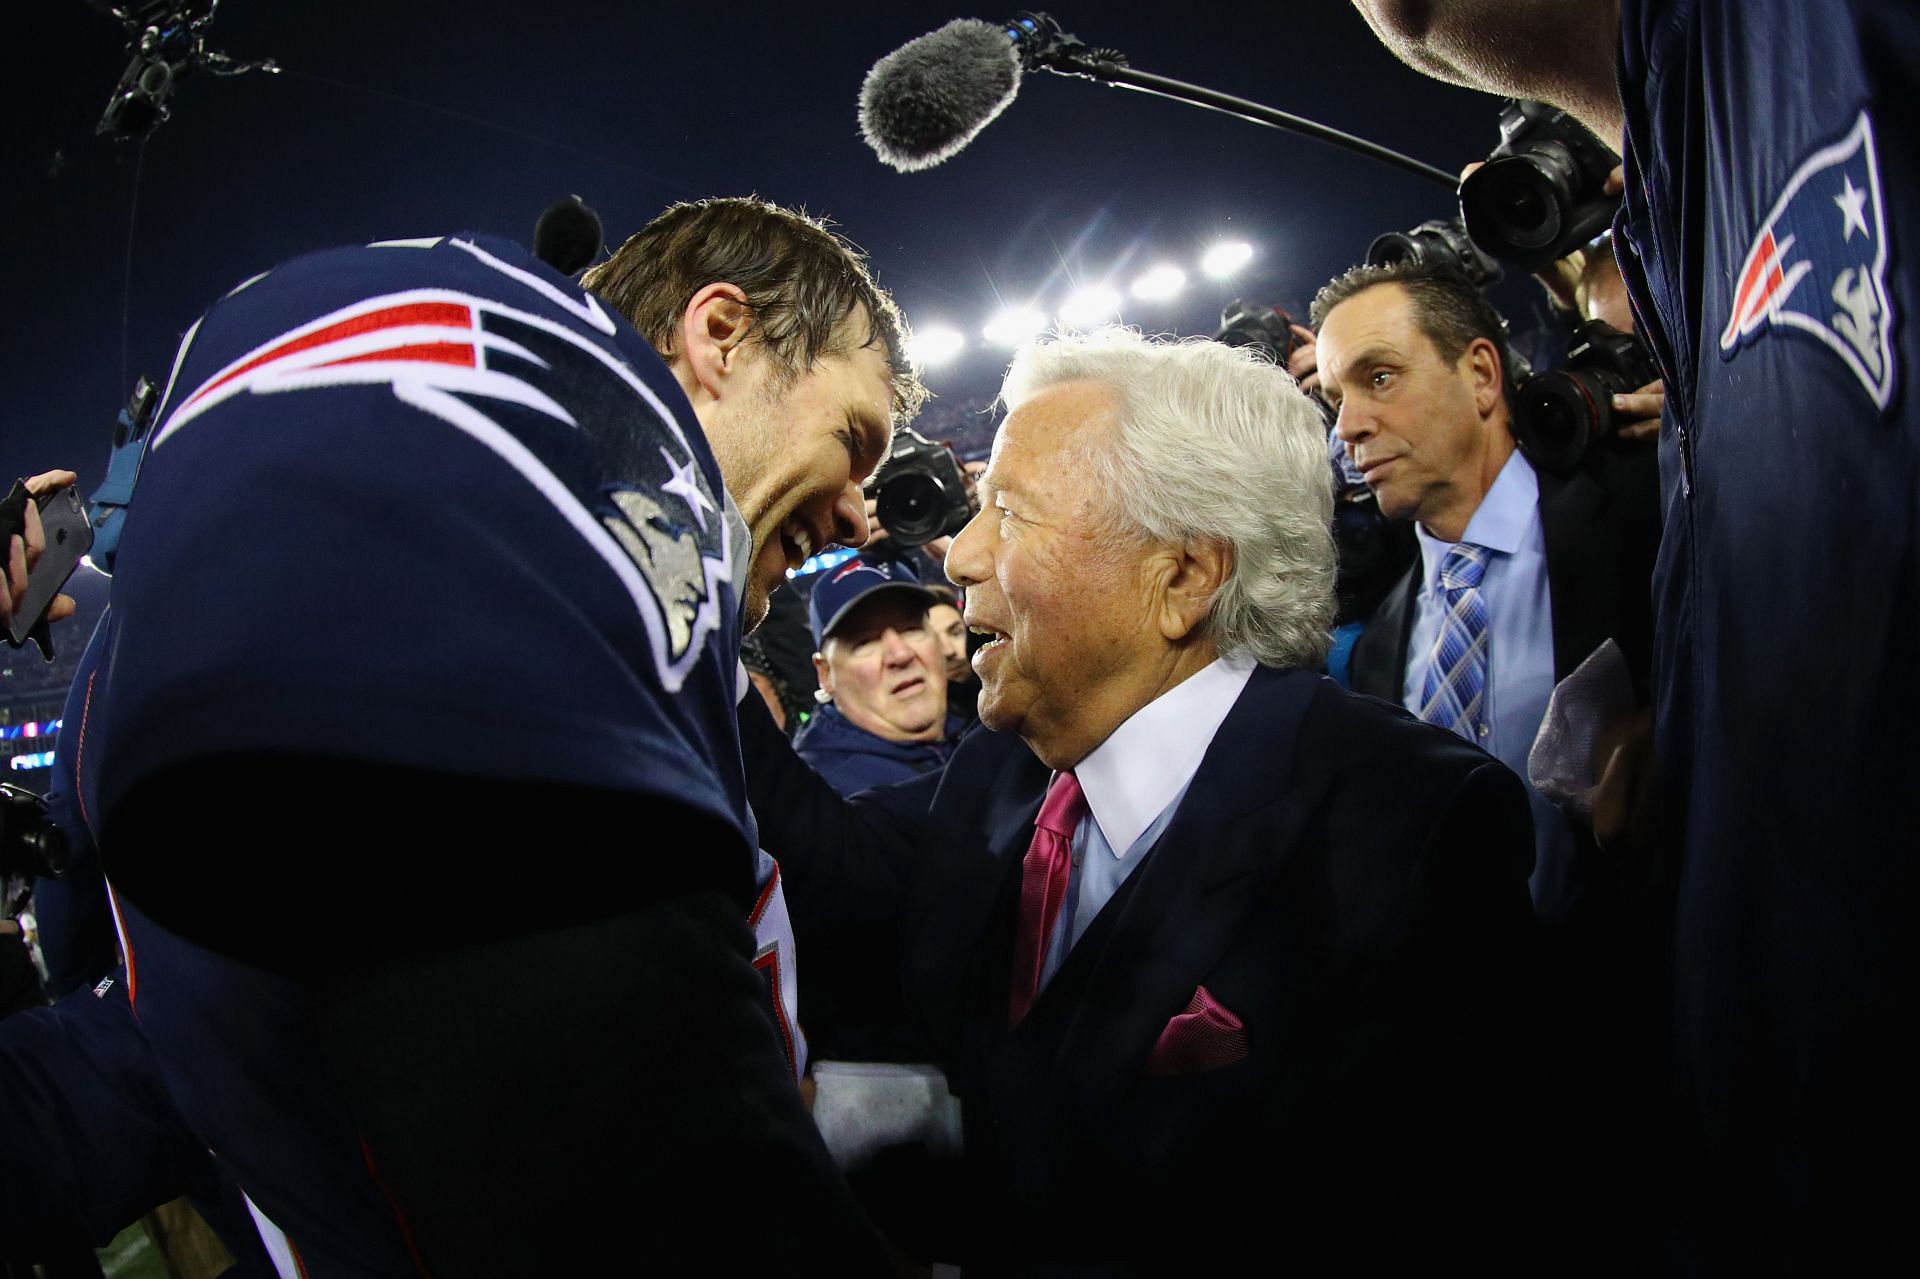 Tom Brady would need owner approval to return